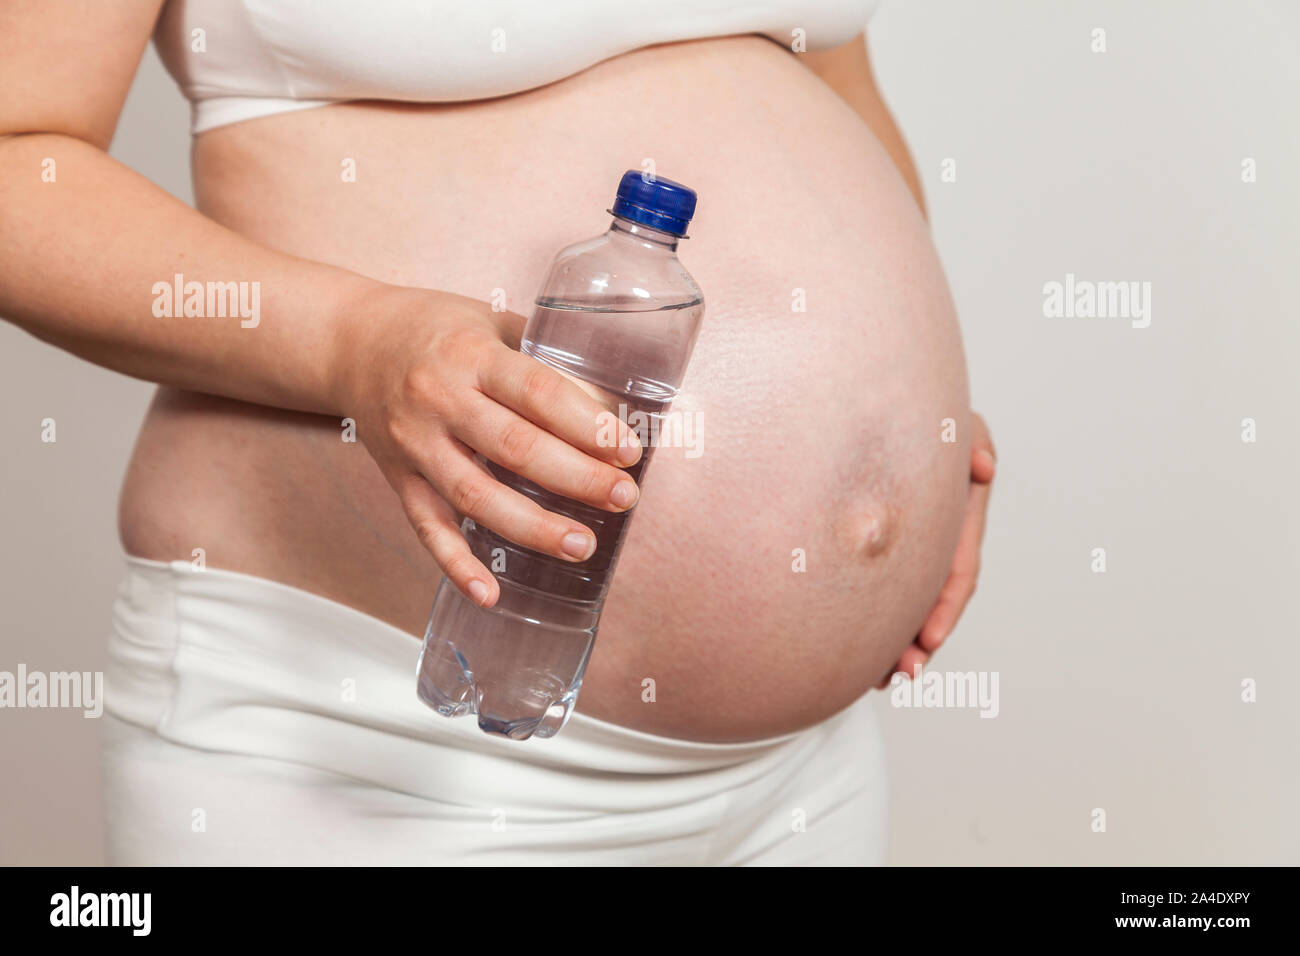 Pregnant woman holding a bottle of water in hand Stock Photo